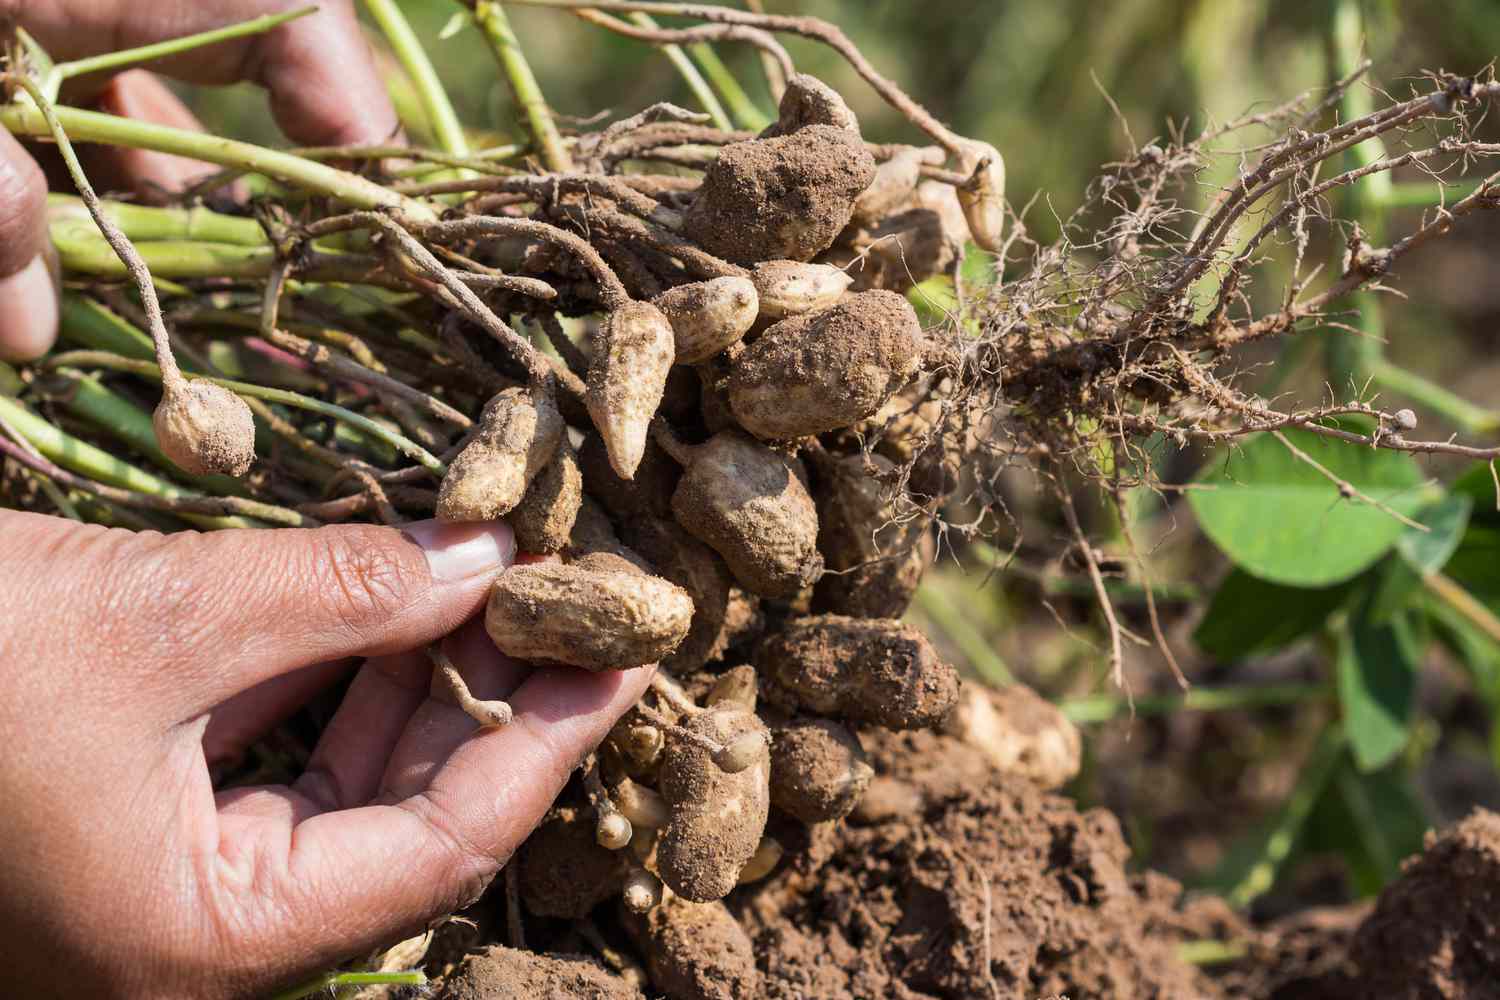 How to Harvest Peanuts